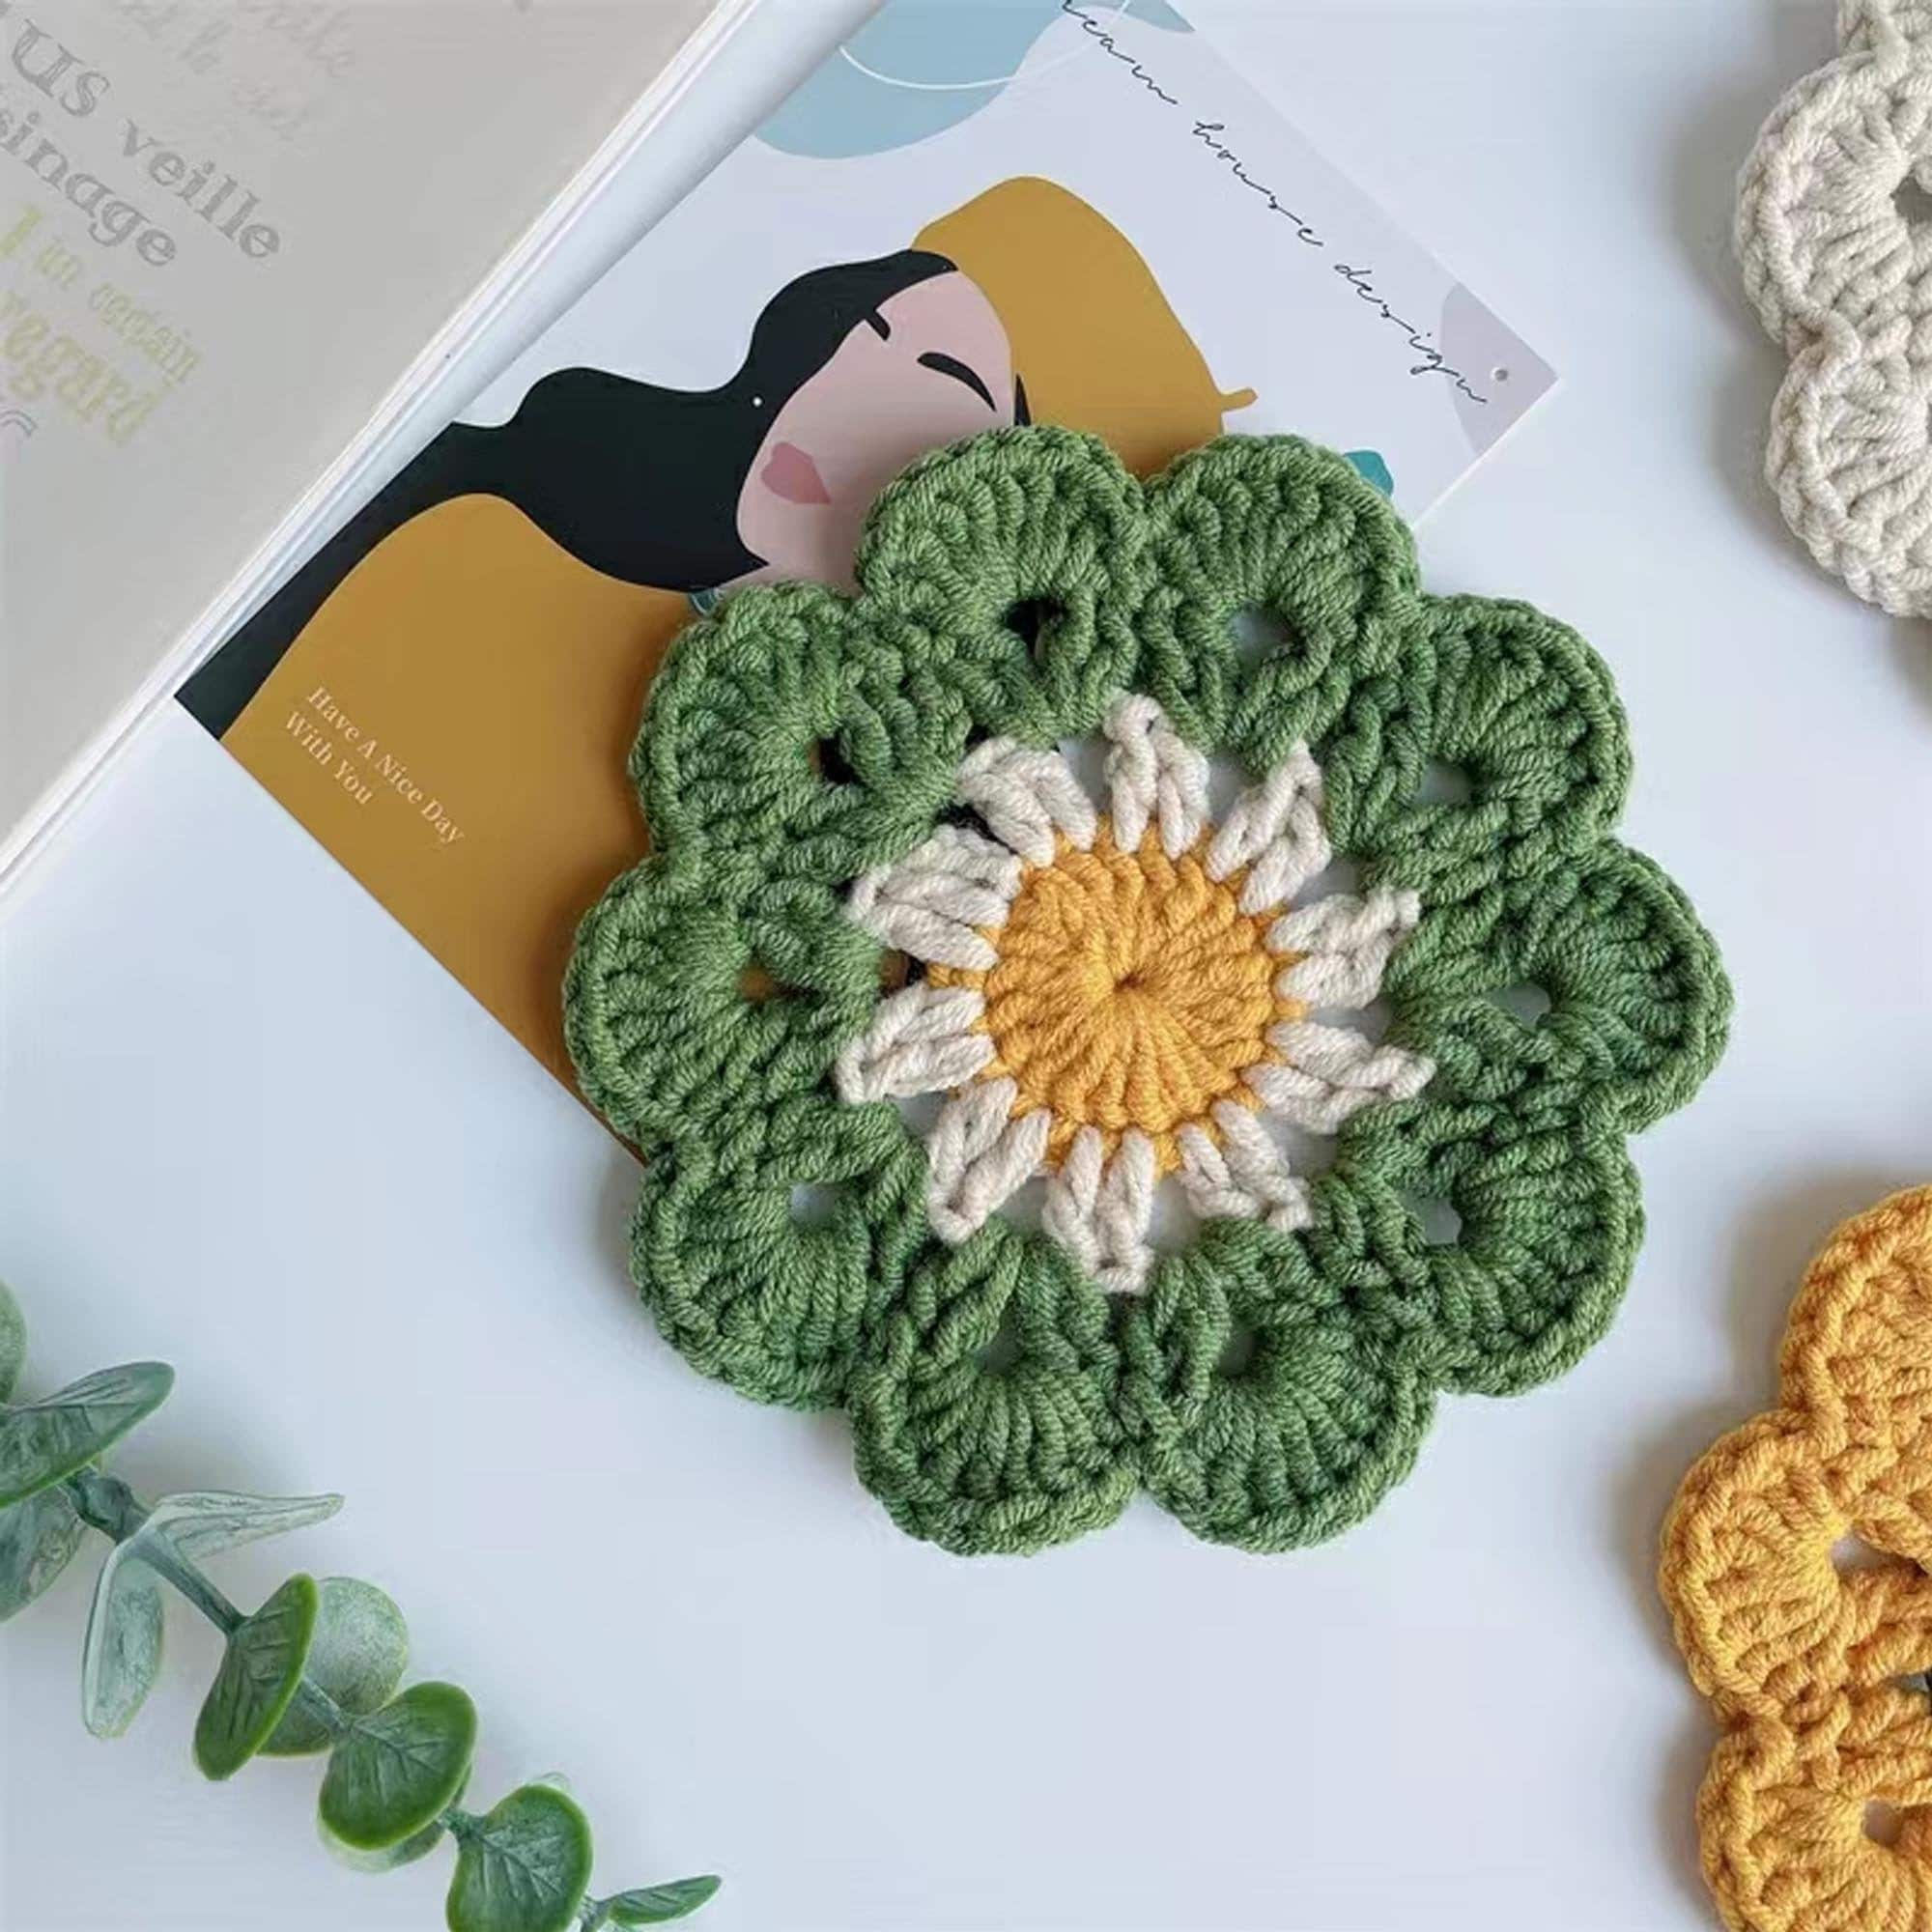 16 Fall Crochet Coasters for Relaxing Evenings with Cup of Tea – Free  Crochet Patterns